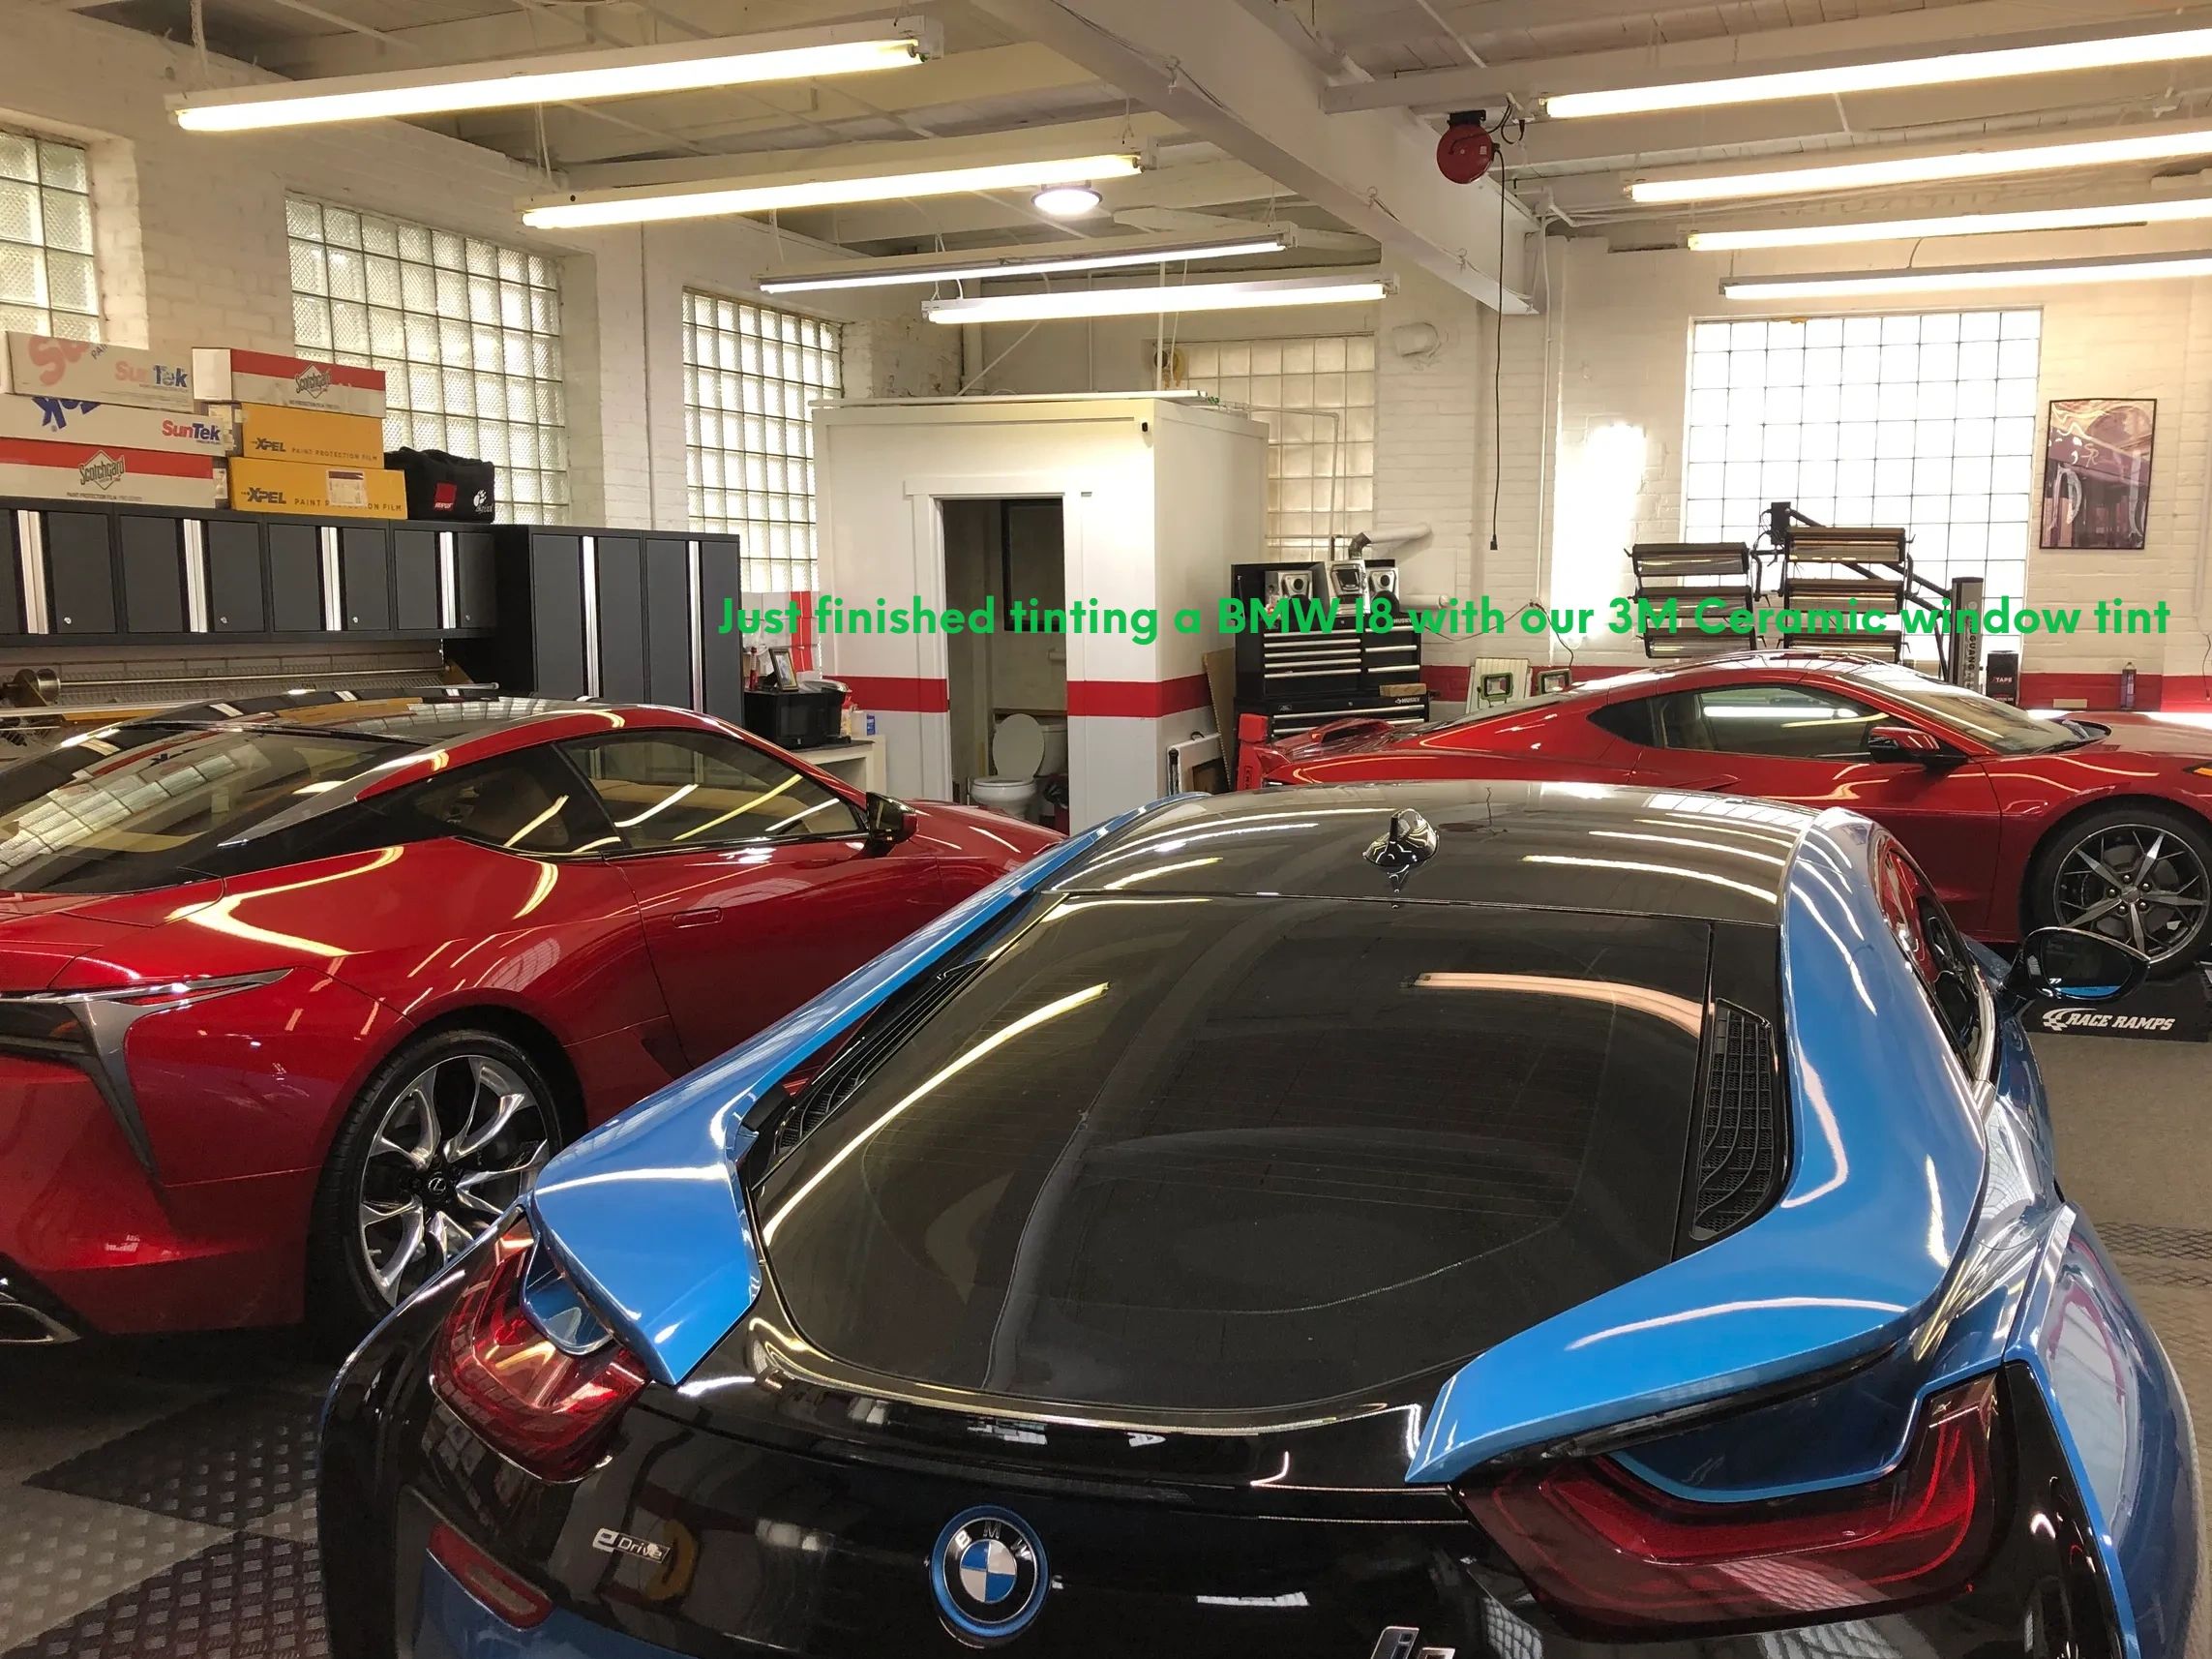 BMW I8, Lexus LC 500 and a corvette being worked on inside Tint Pros Cleveland